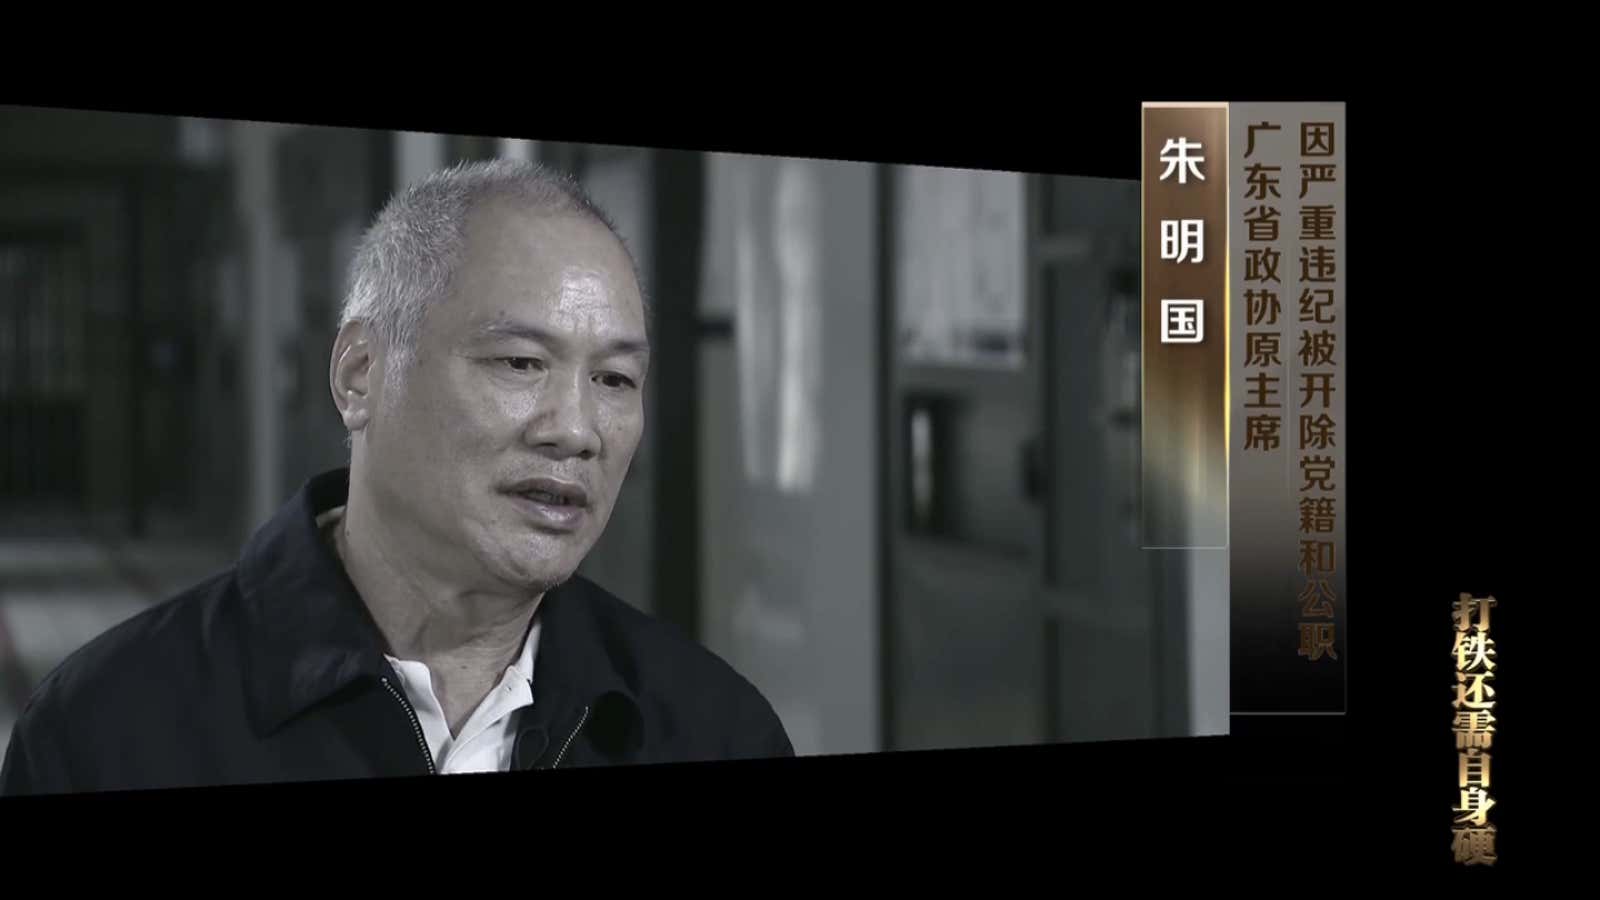 Zhu Mingguo, former anti-graft head in Guangdong province, confesses.